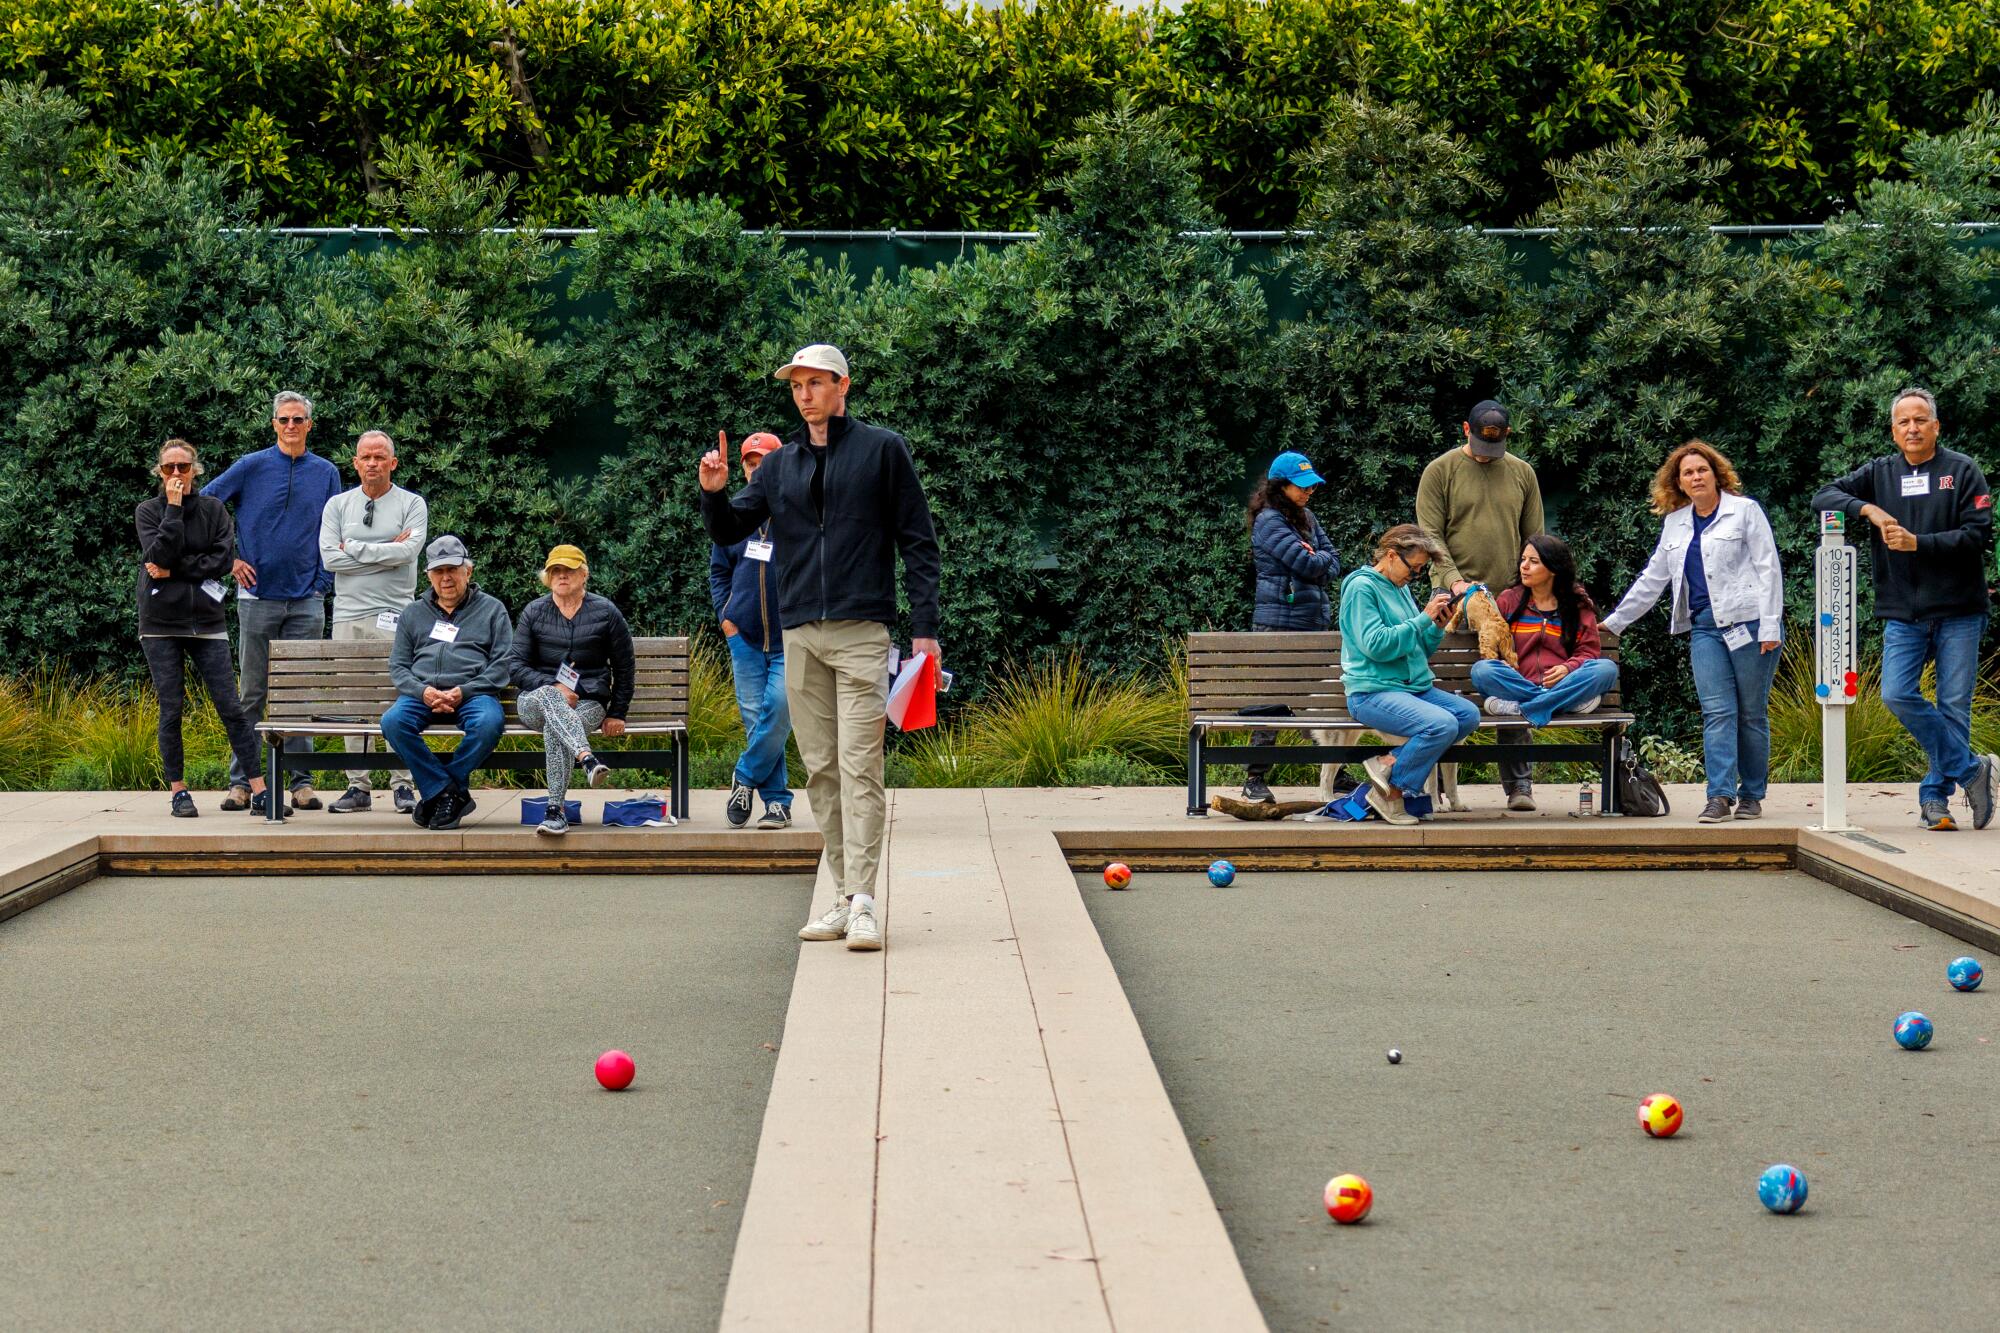 A man walking between bocce courts, counting scores while a crowd watches.